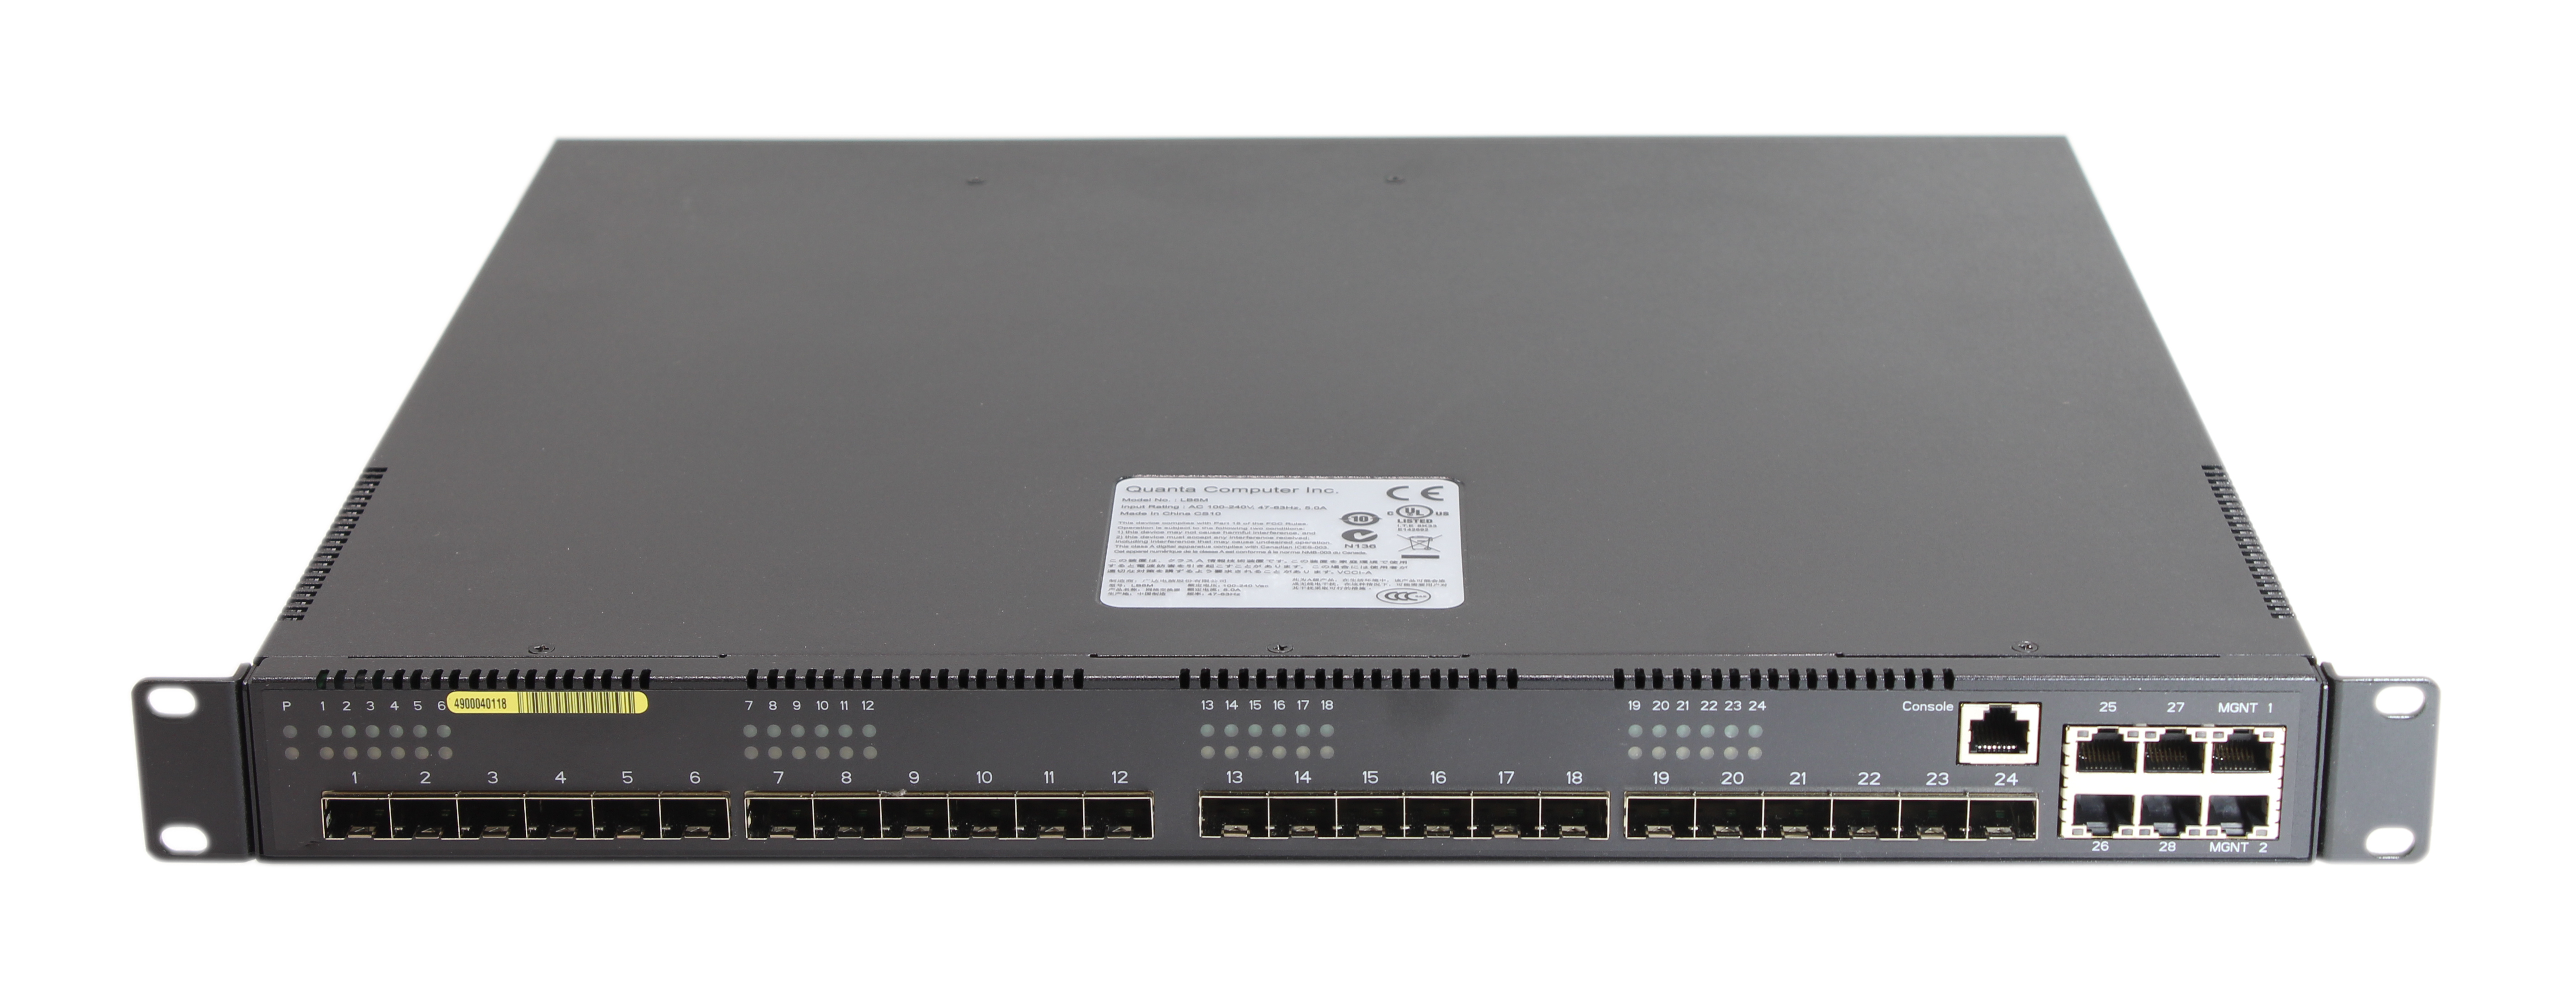 Quanta Network Switch 10GB 24-Ports SFP+ Dual Power Supply With Rack LB6M